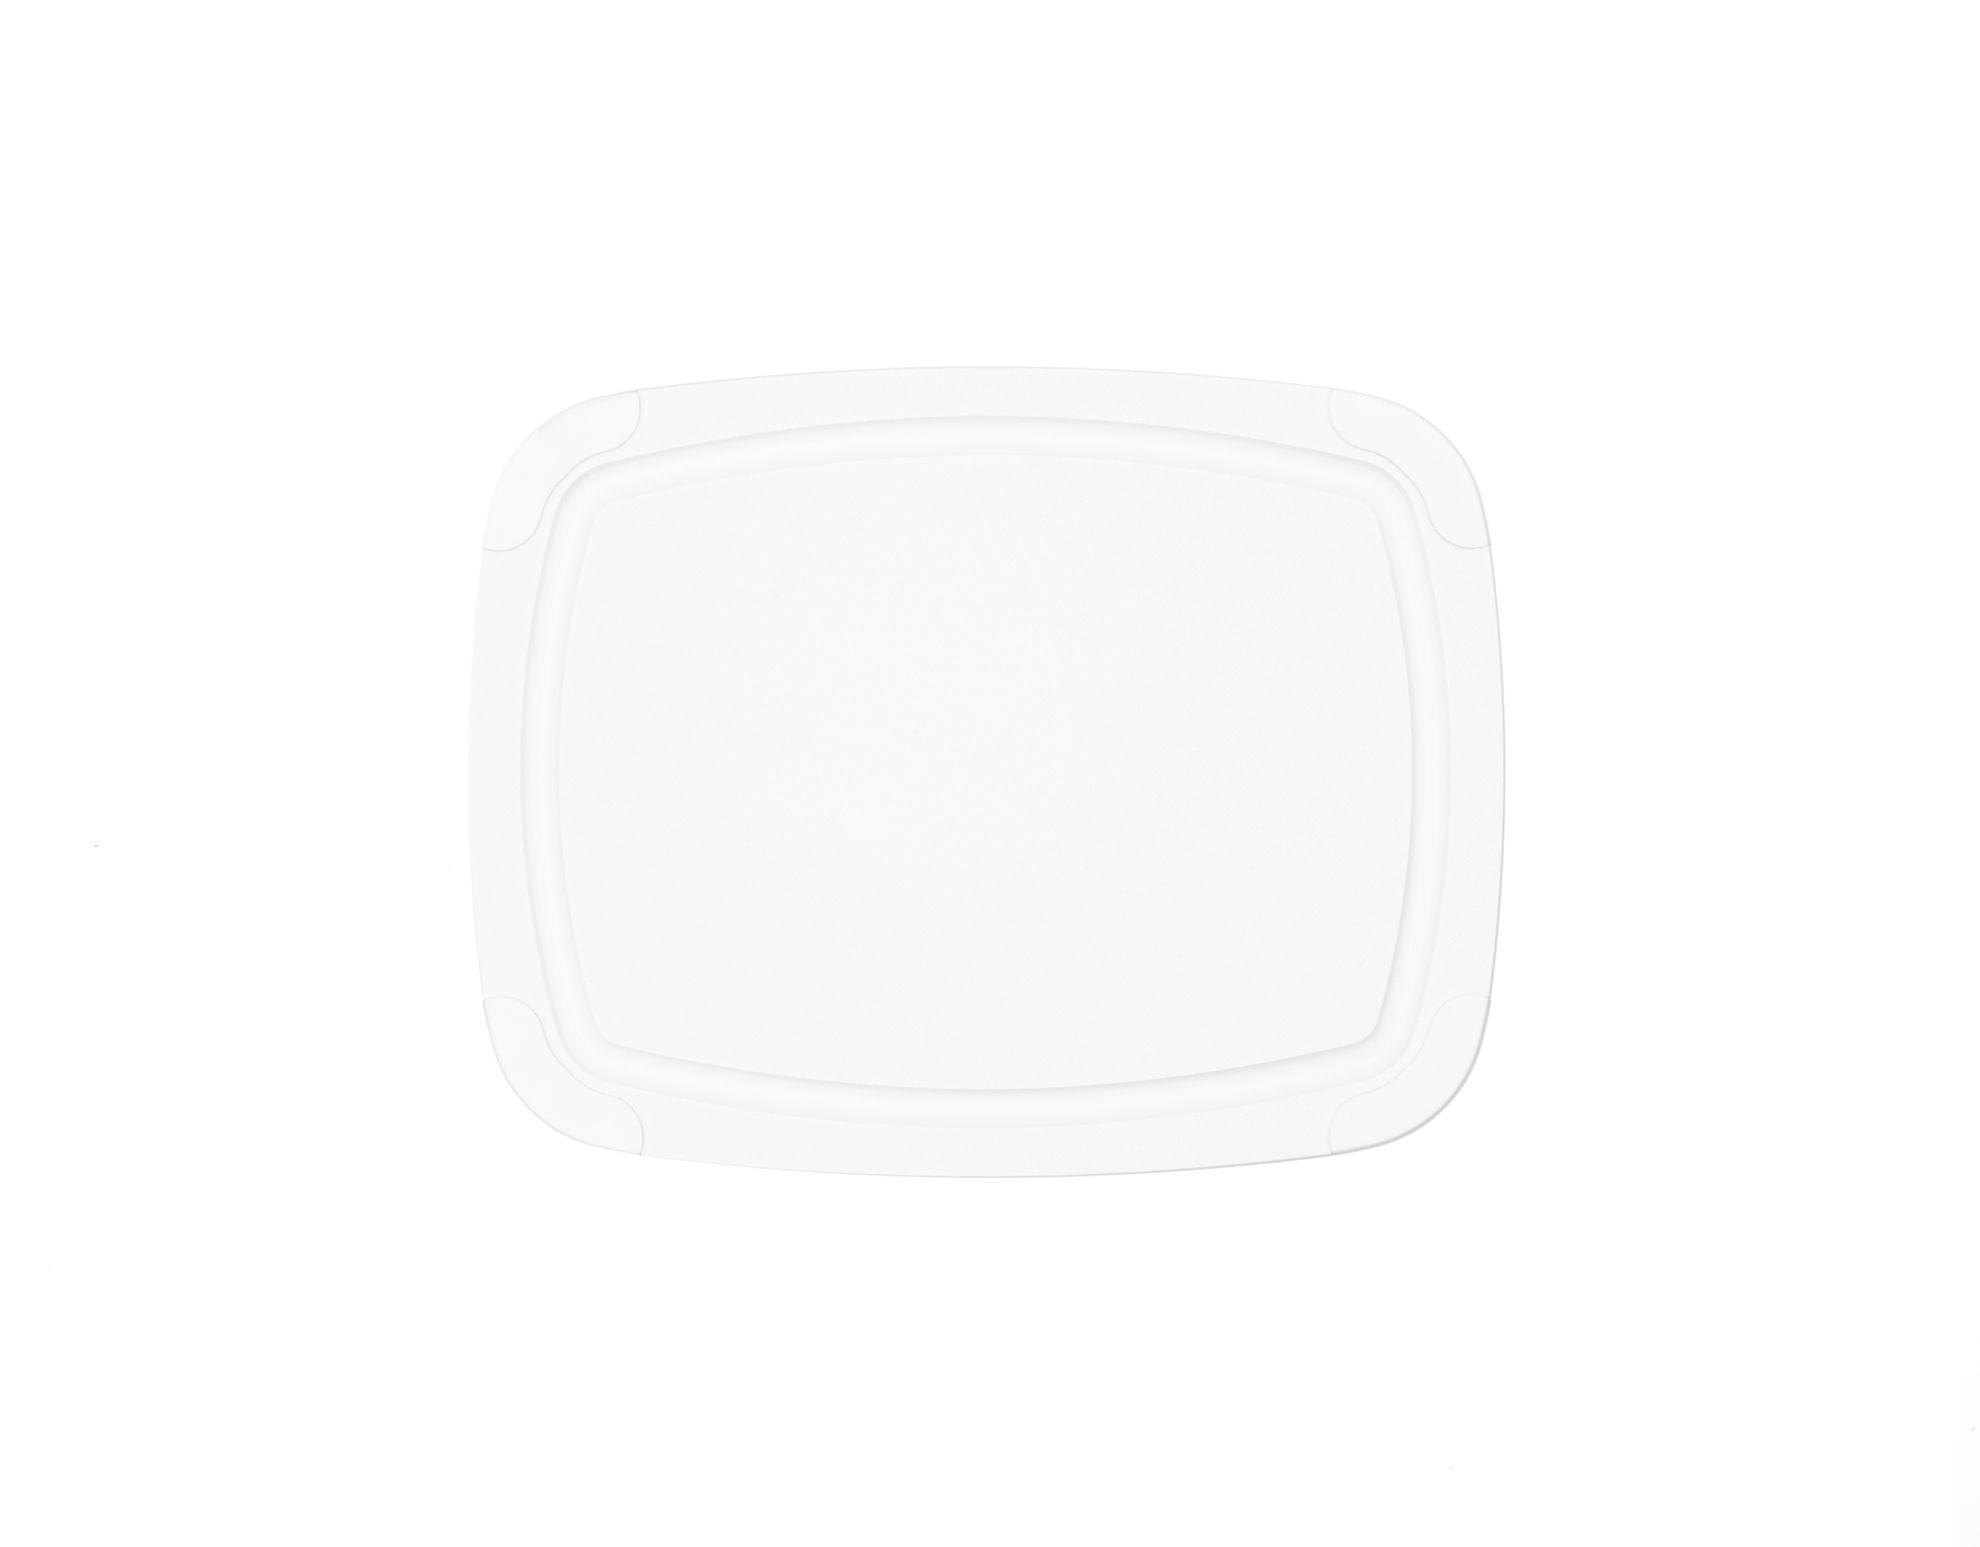 ecooks_MAIN-cutting board poly series-white-402901